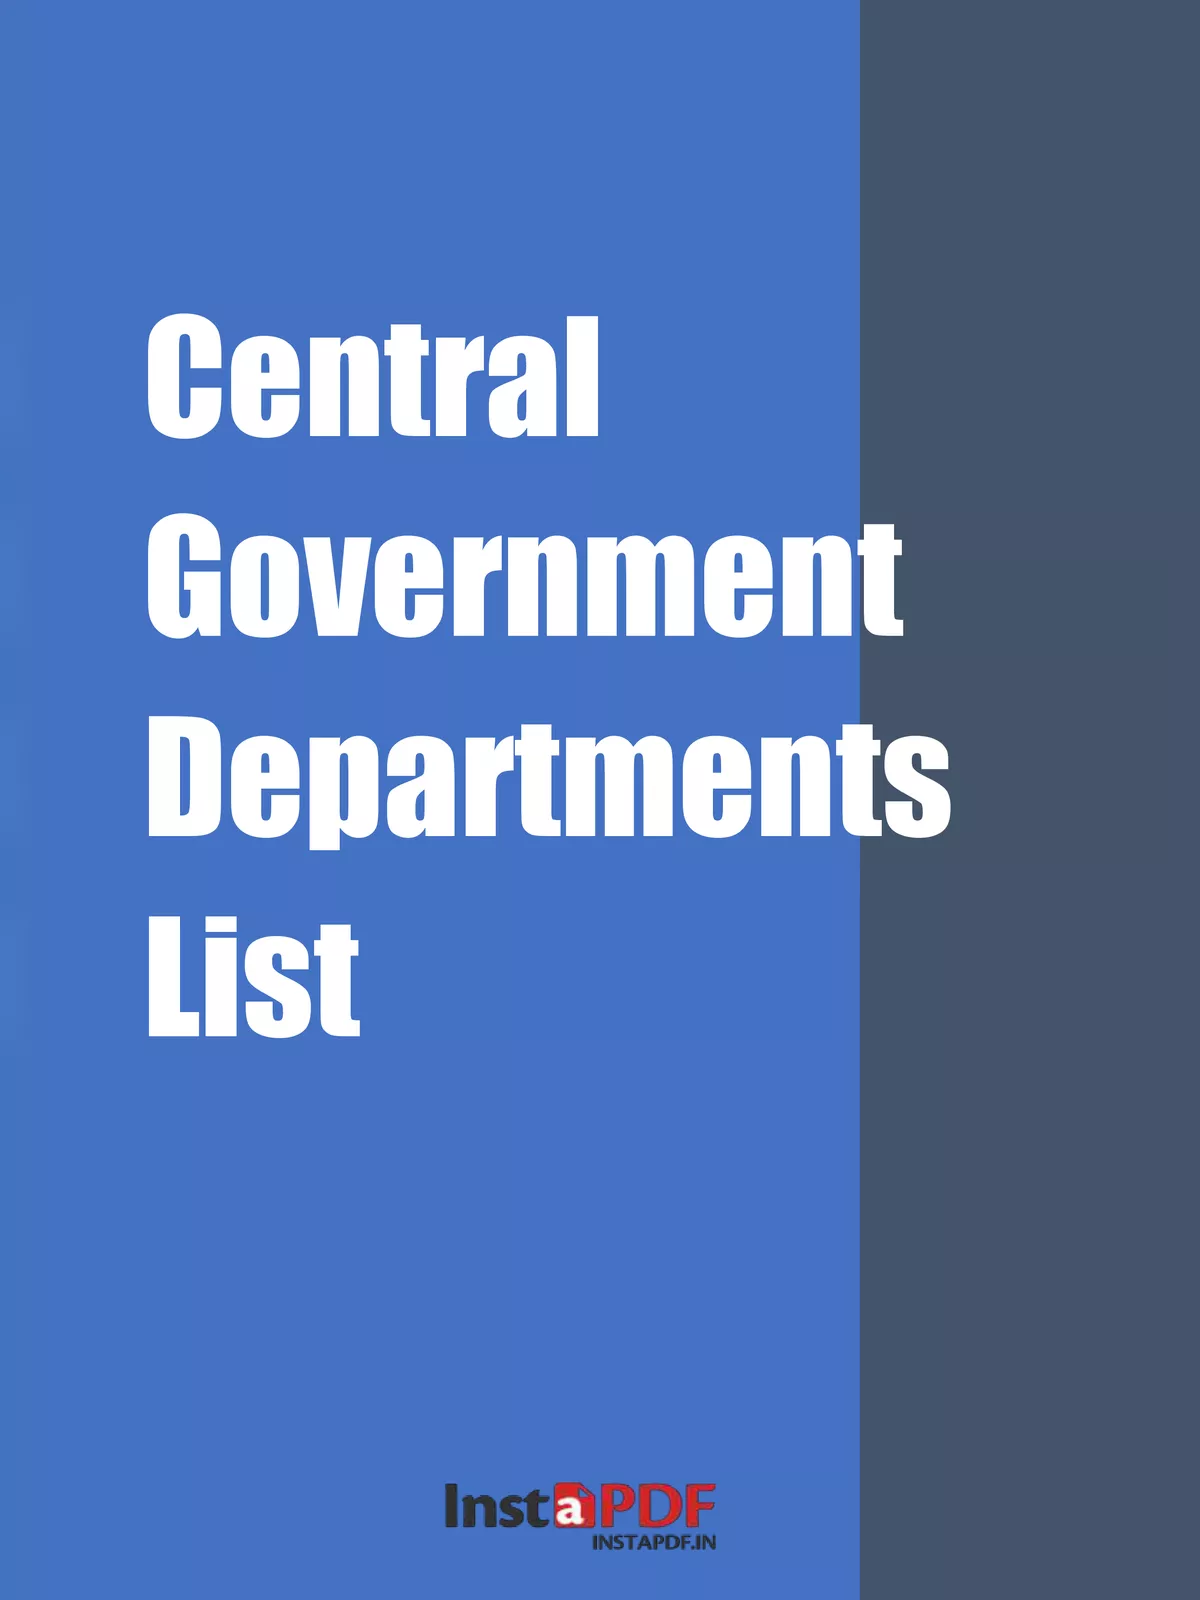 Central Government Departments List